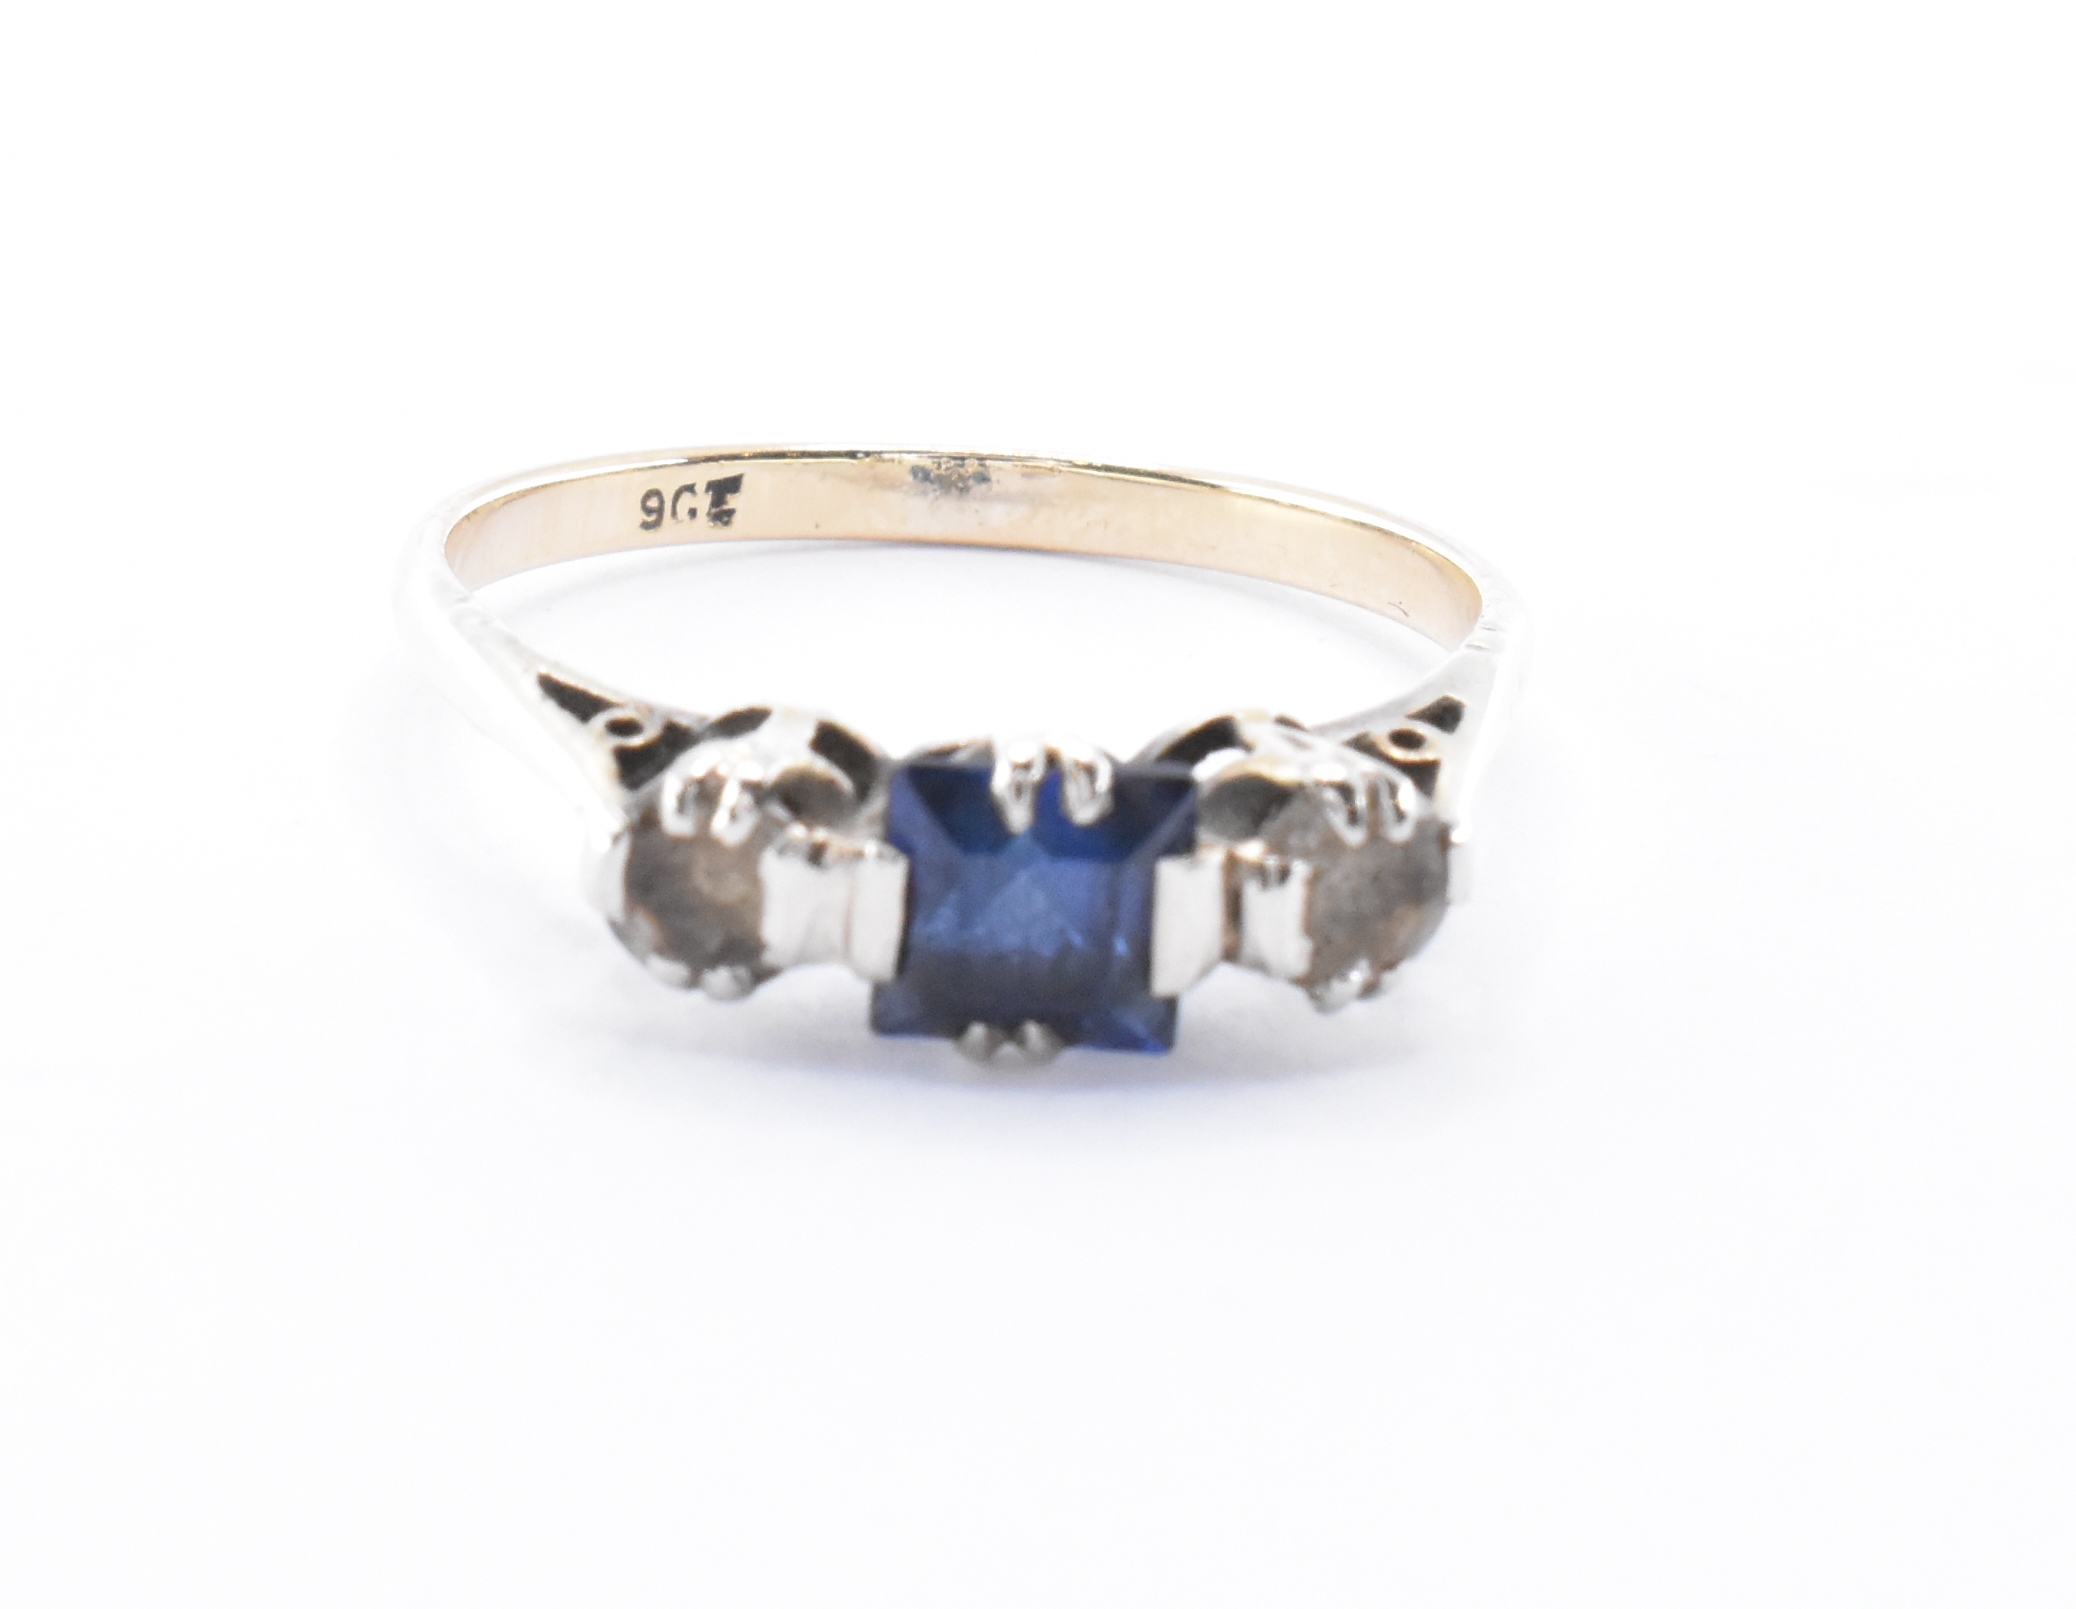 9CT GOLD SYNTHETIC SAPPHIRE & WHITE STONE RING - Image 2 of 6